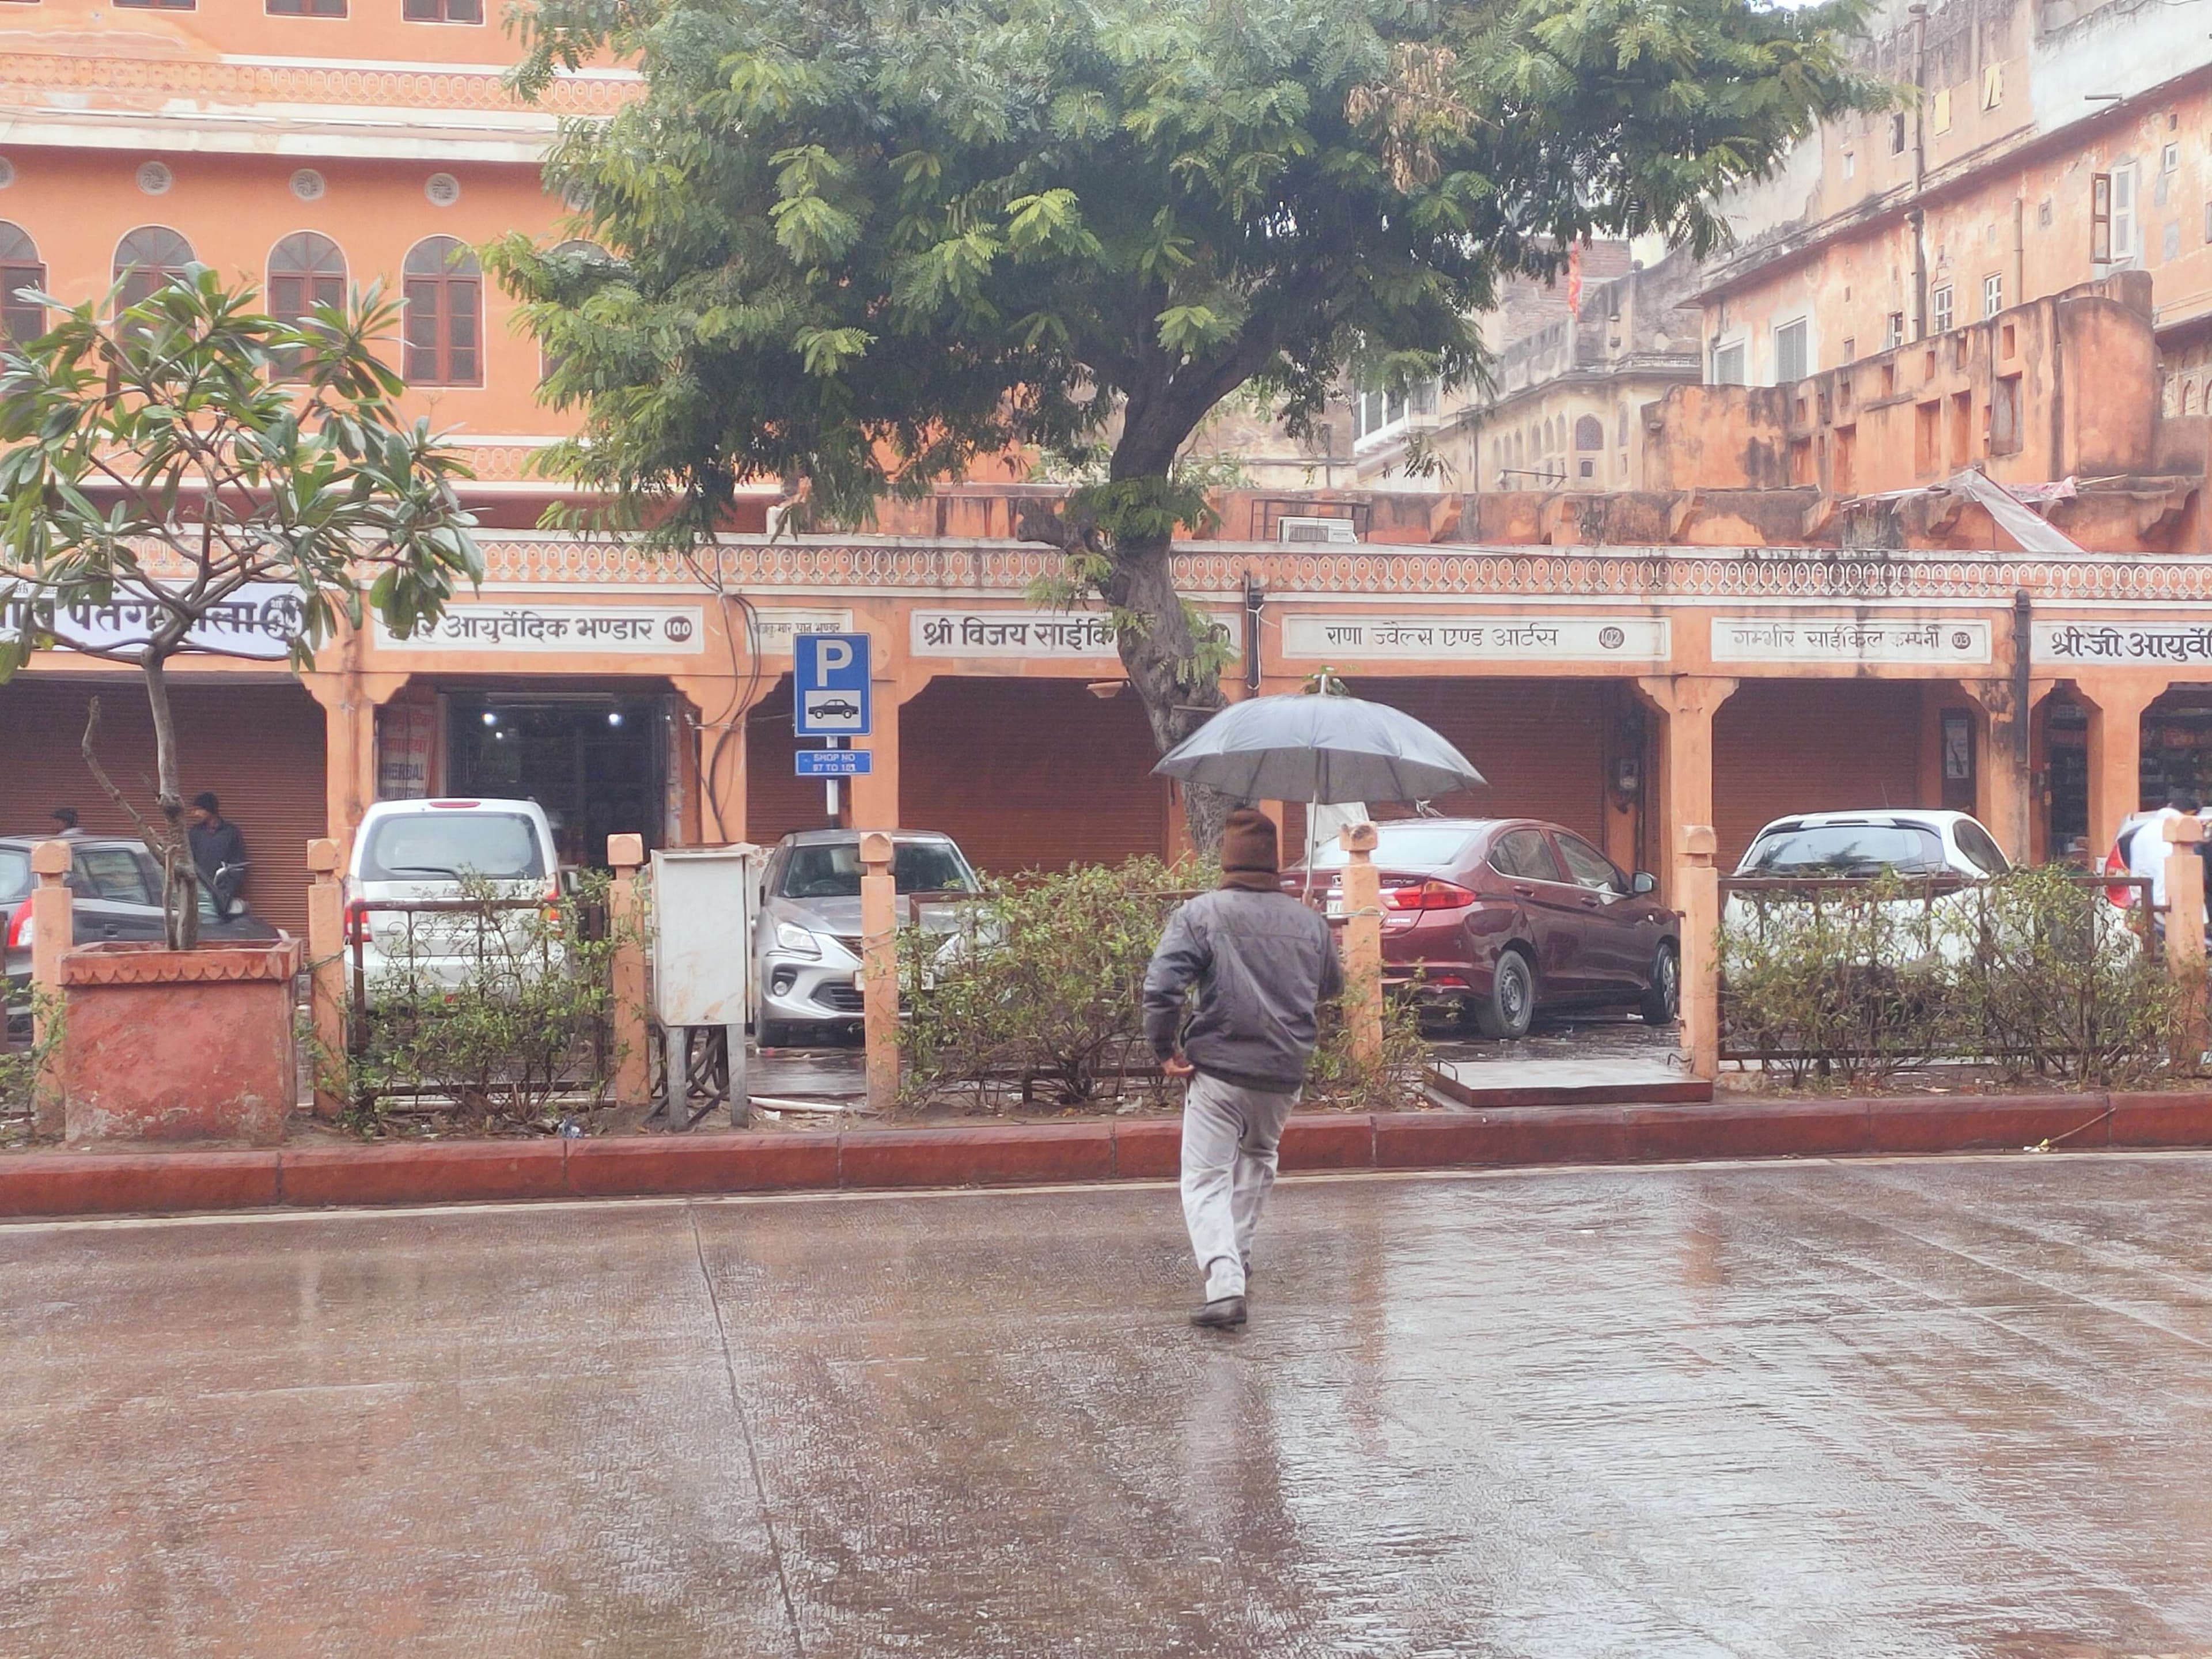 Light and heavy rain throughout the day in Jaipur city